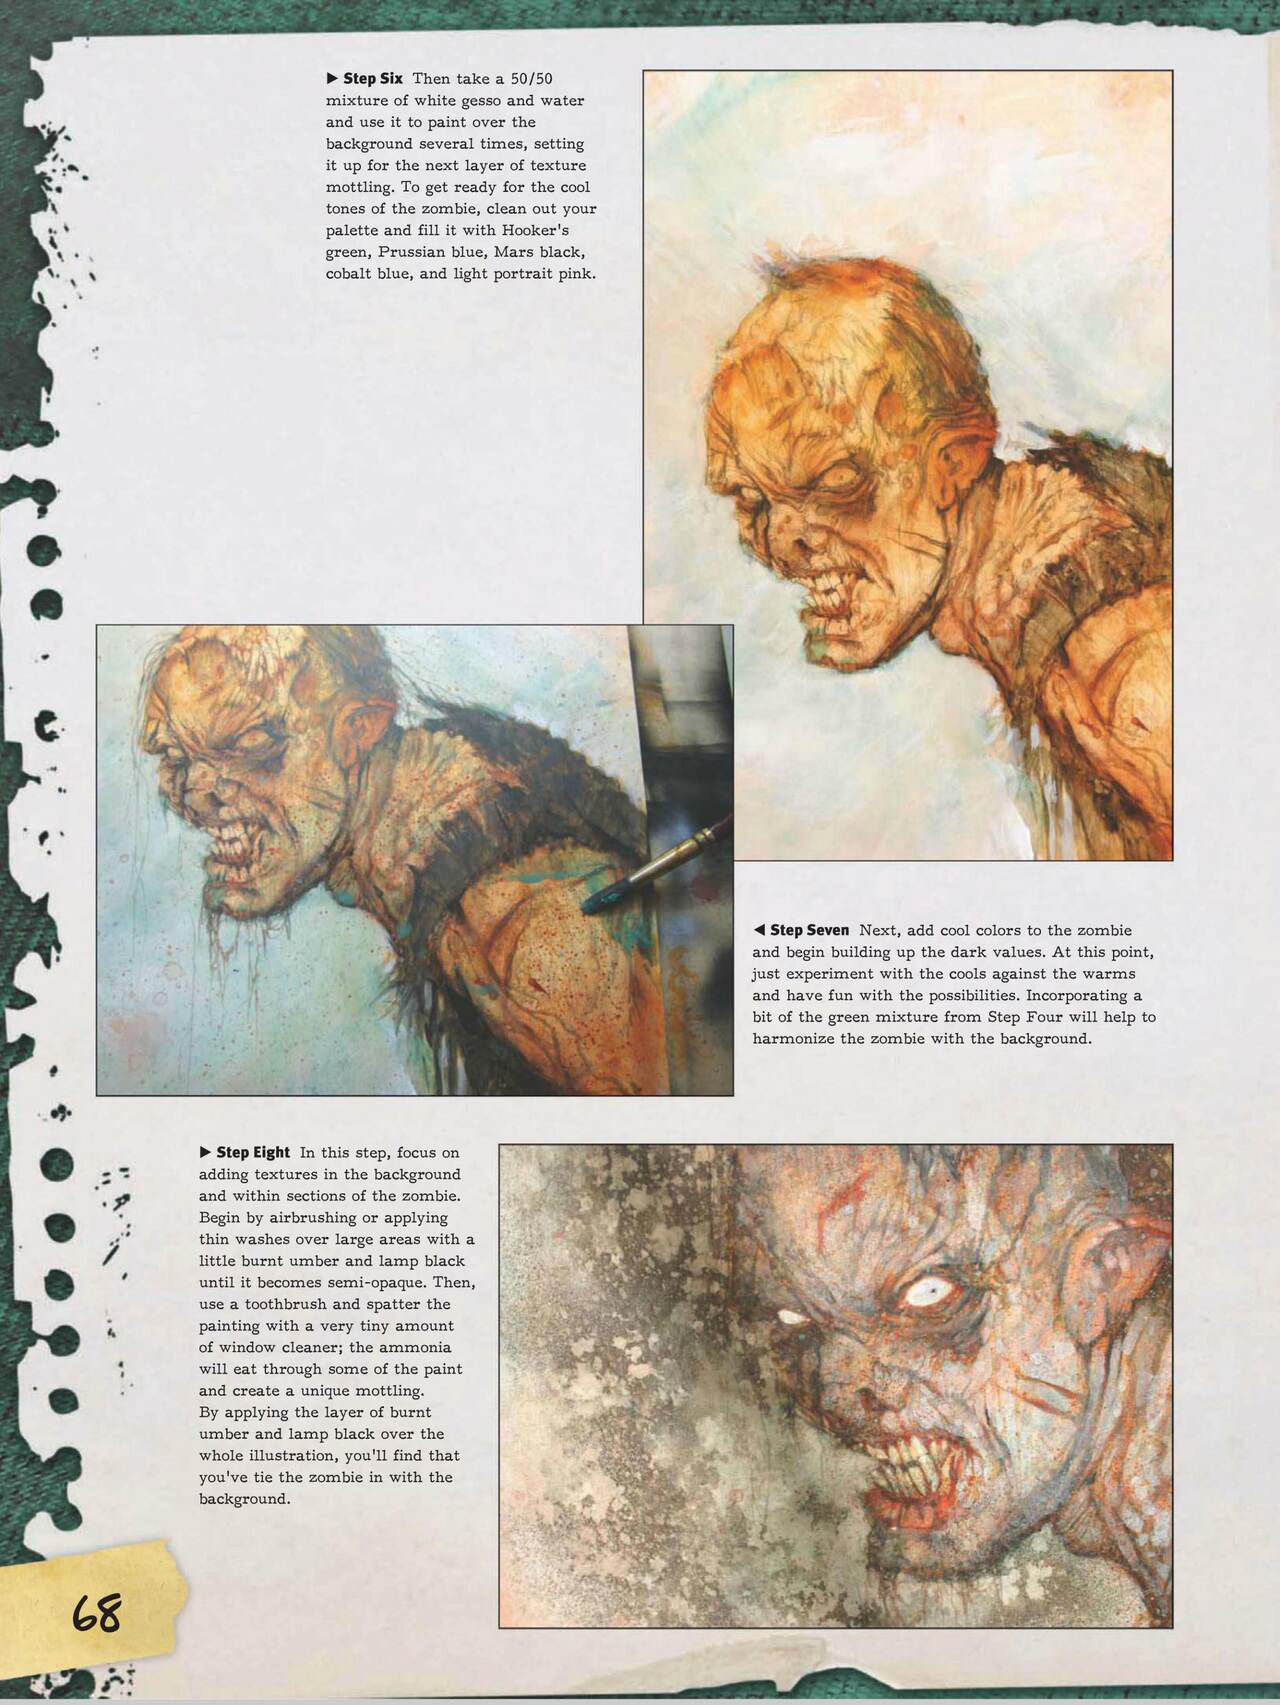 How to Draw Zombies: Discover the secrets to drawing, painting, and illustrating the undead 僵尸描绘集 69